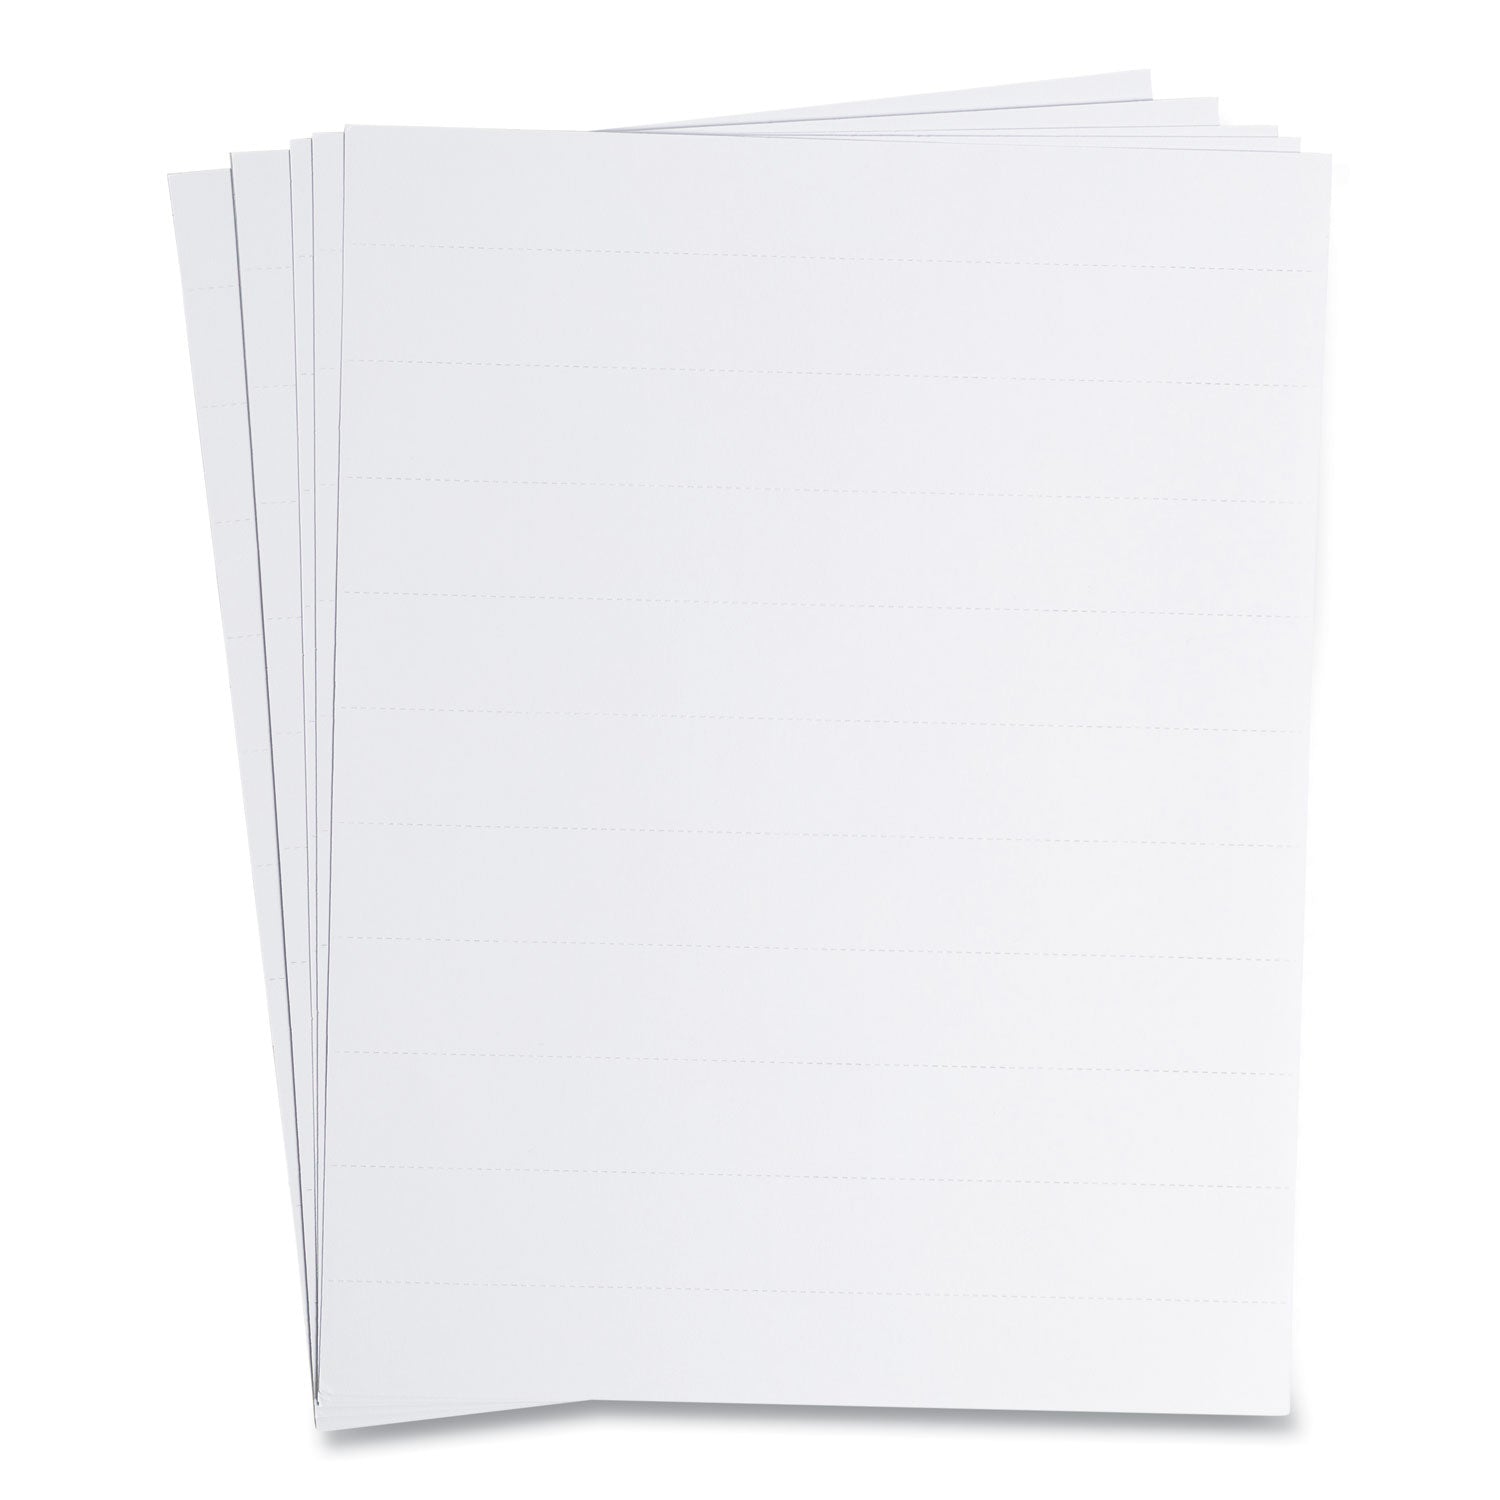 data-card-replacement-sheet-85-x-11-sheets-perforated-at-1-white-10-pack_ubrfm1615 - 4